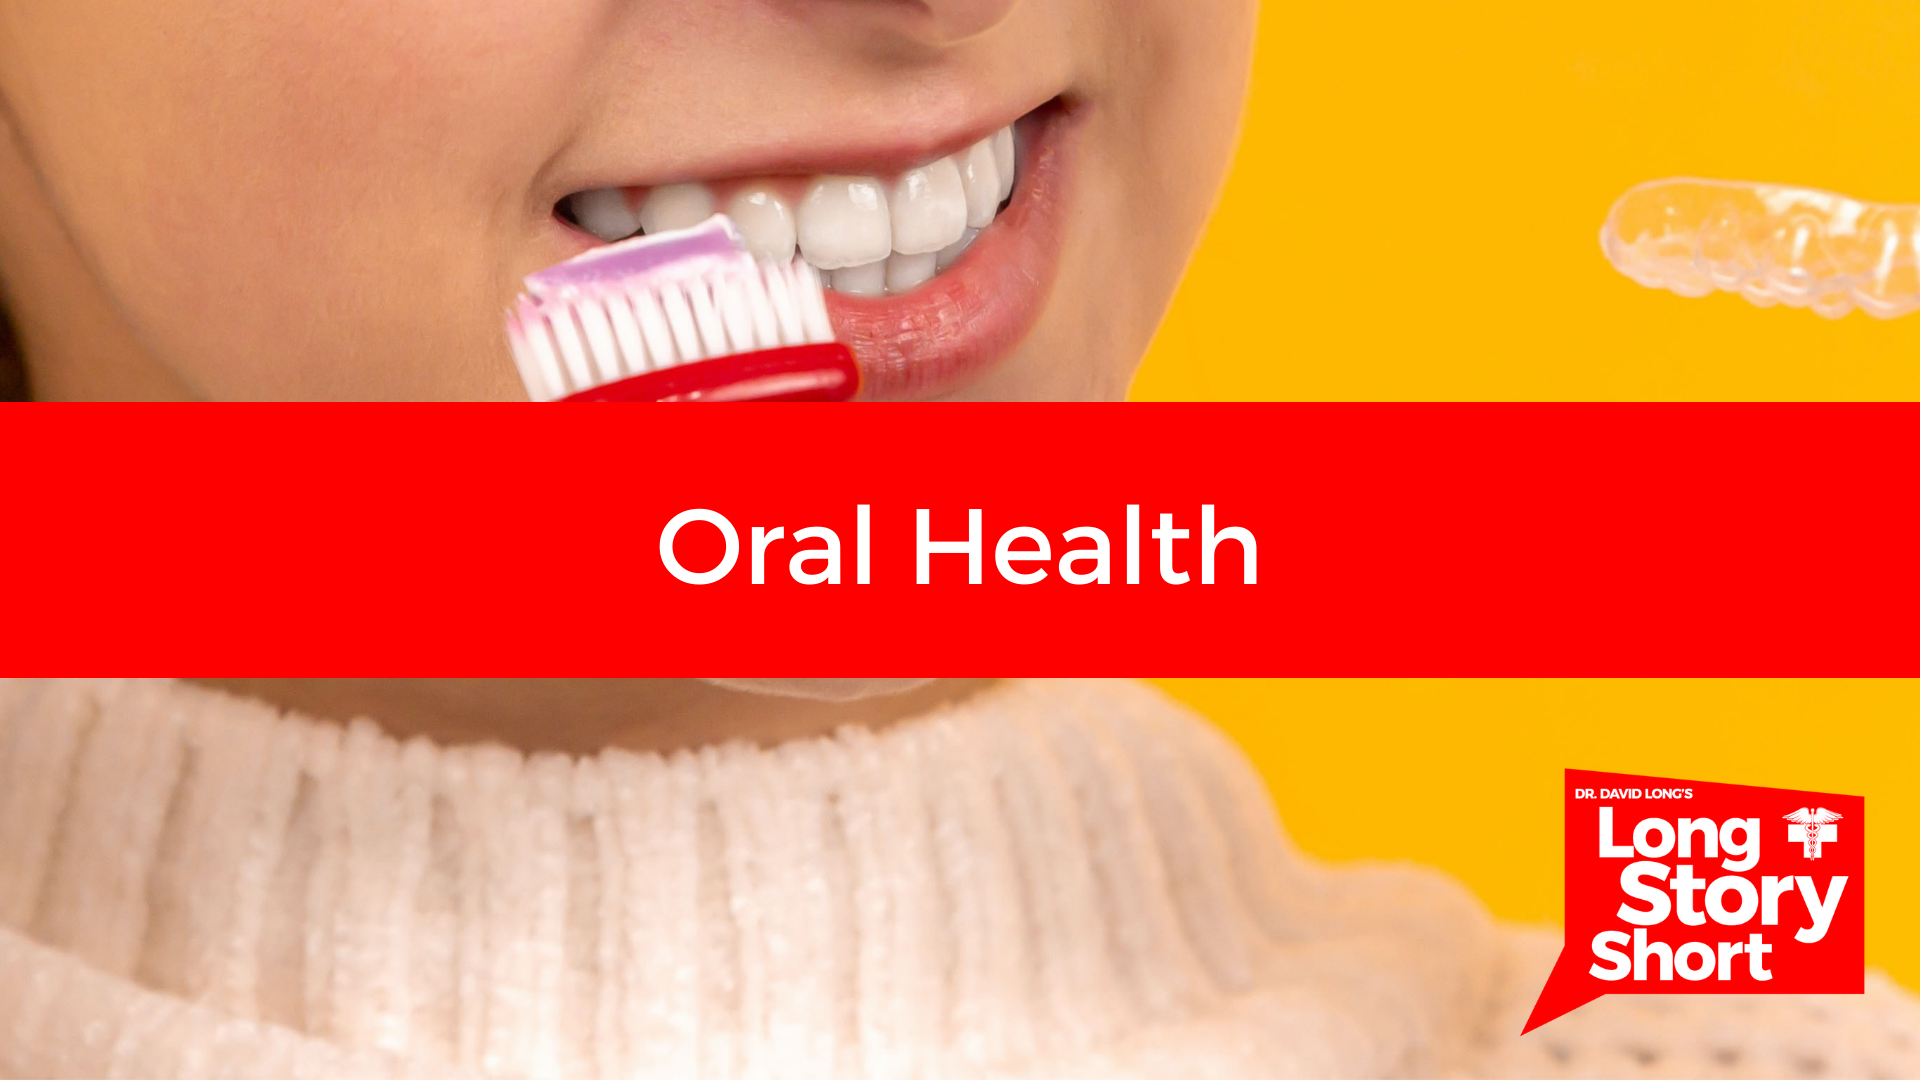 You are currently viewing Oral Health – Dr. David Long